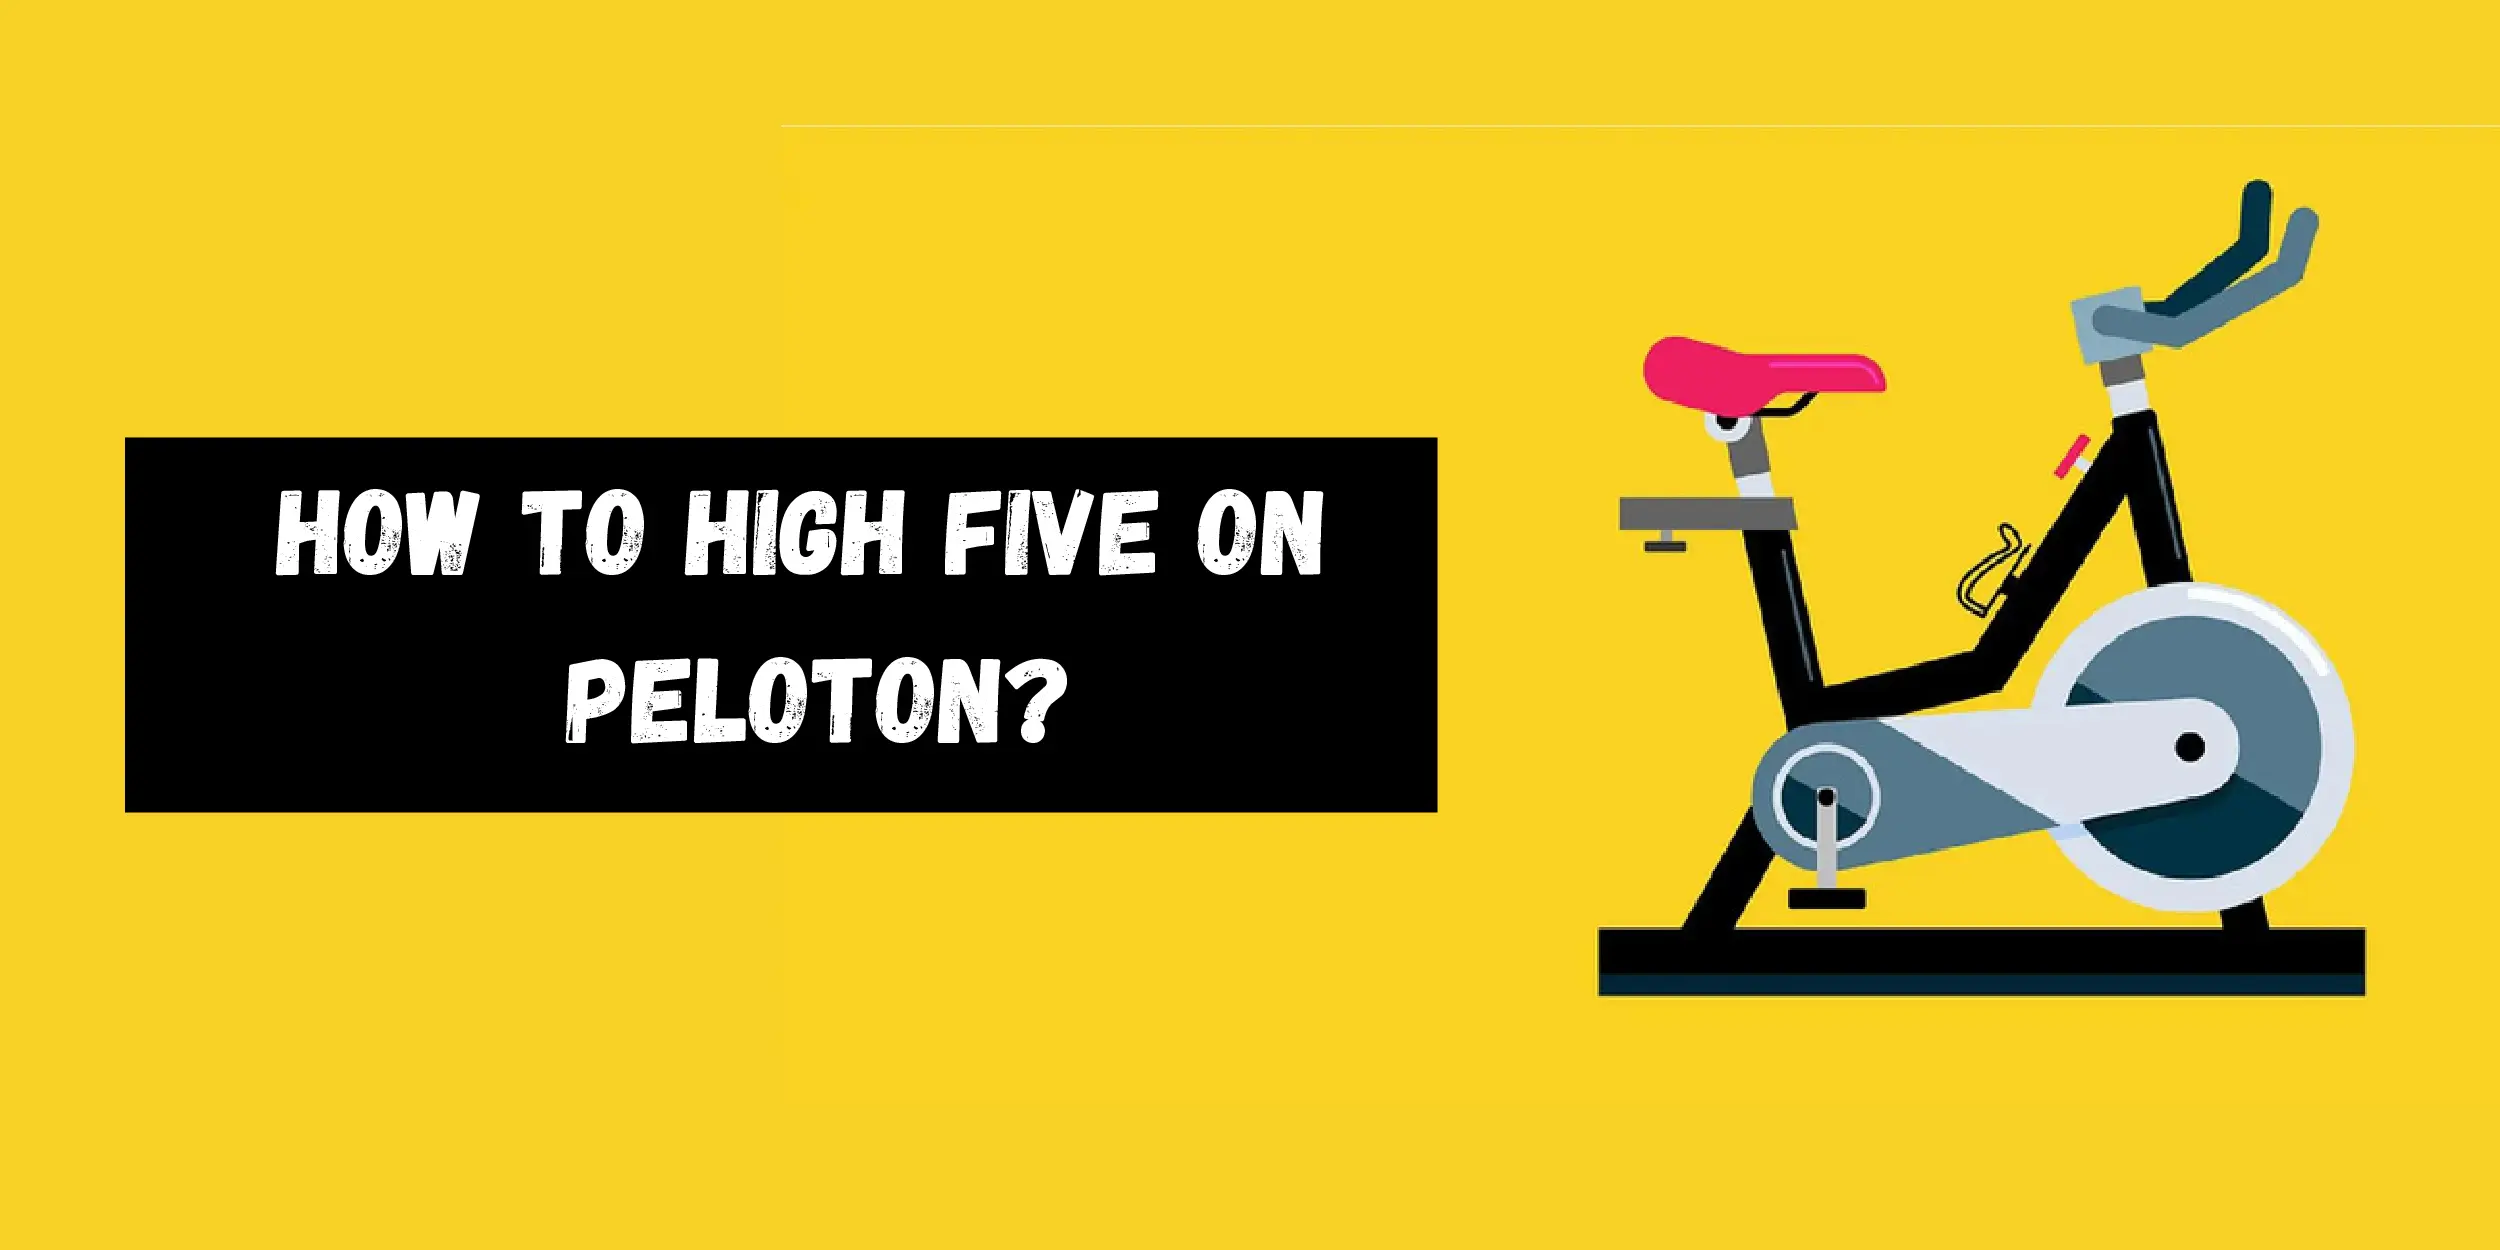 How to High Five on Peloton?